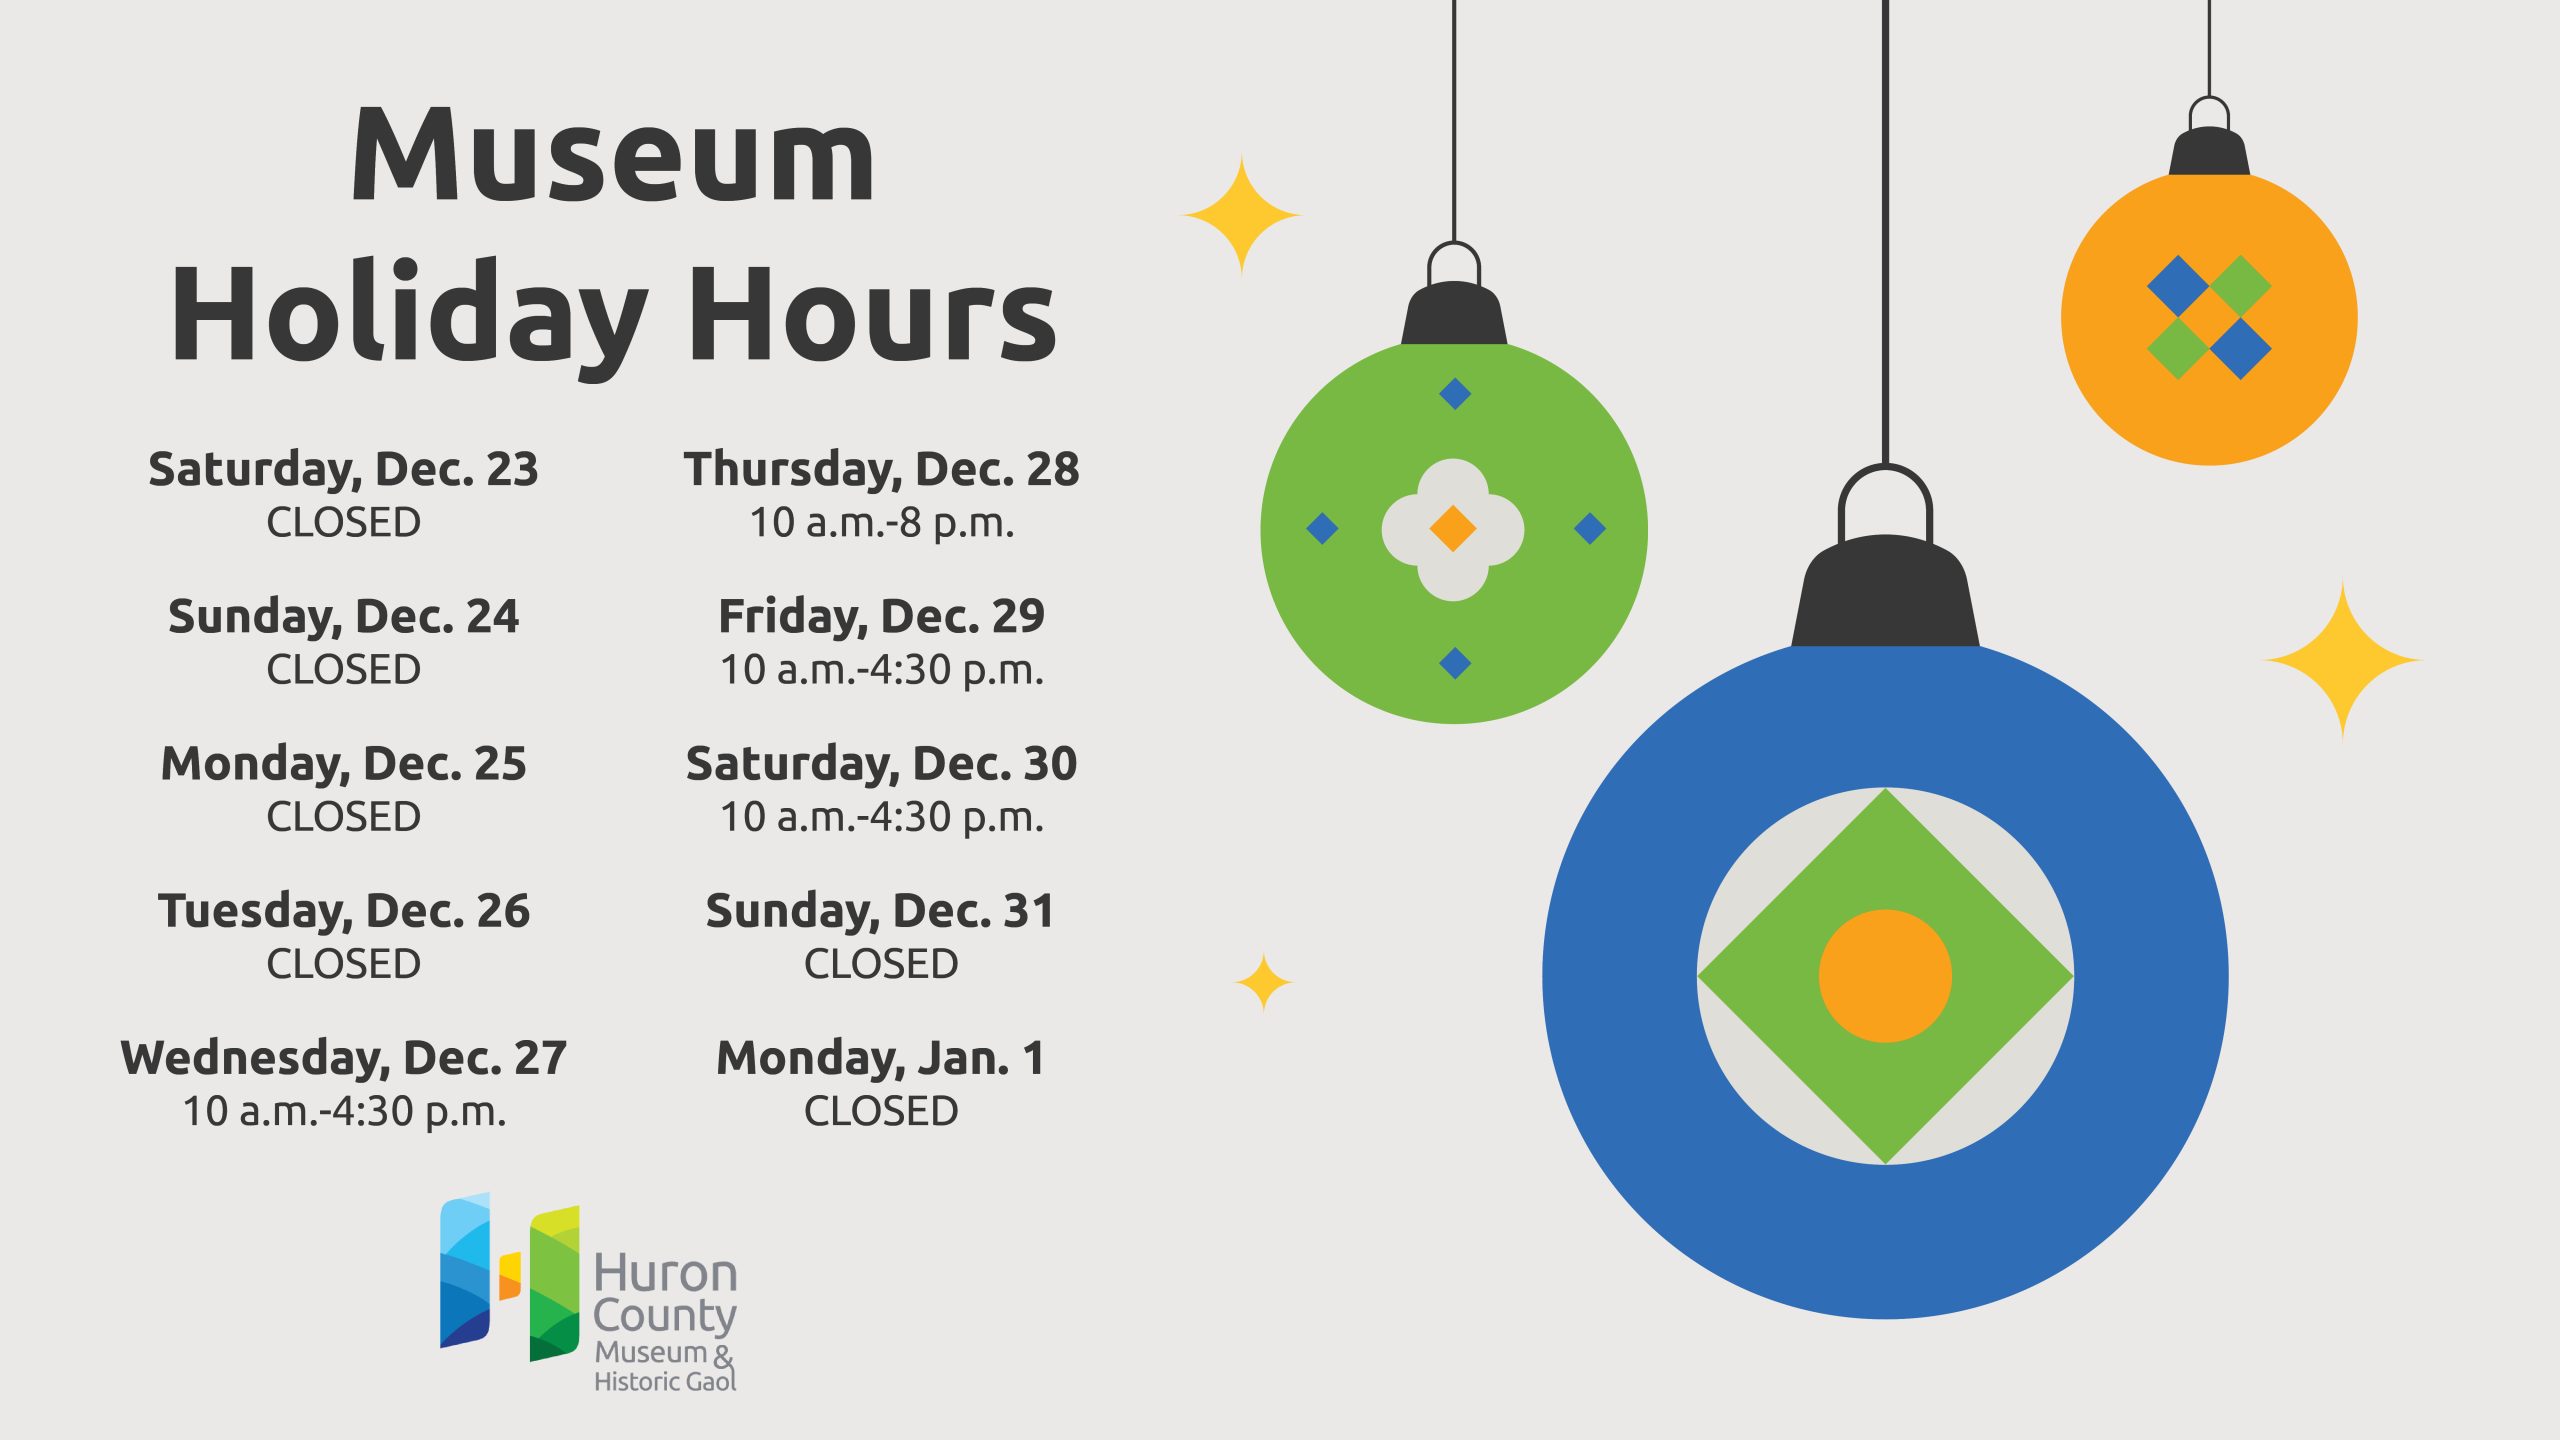 Illustration of Christmas ornaments with a list of Holiday hours